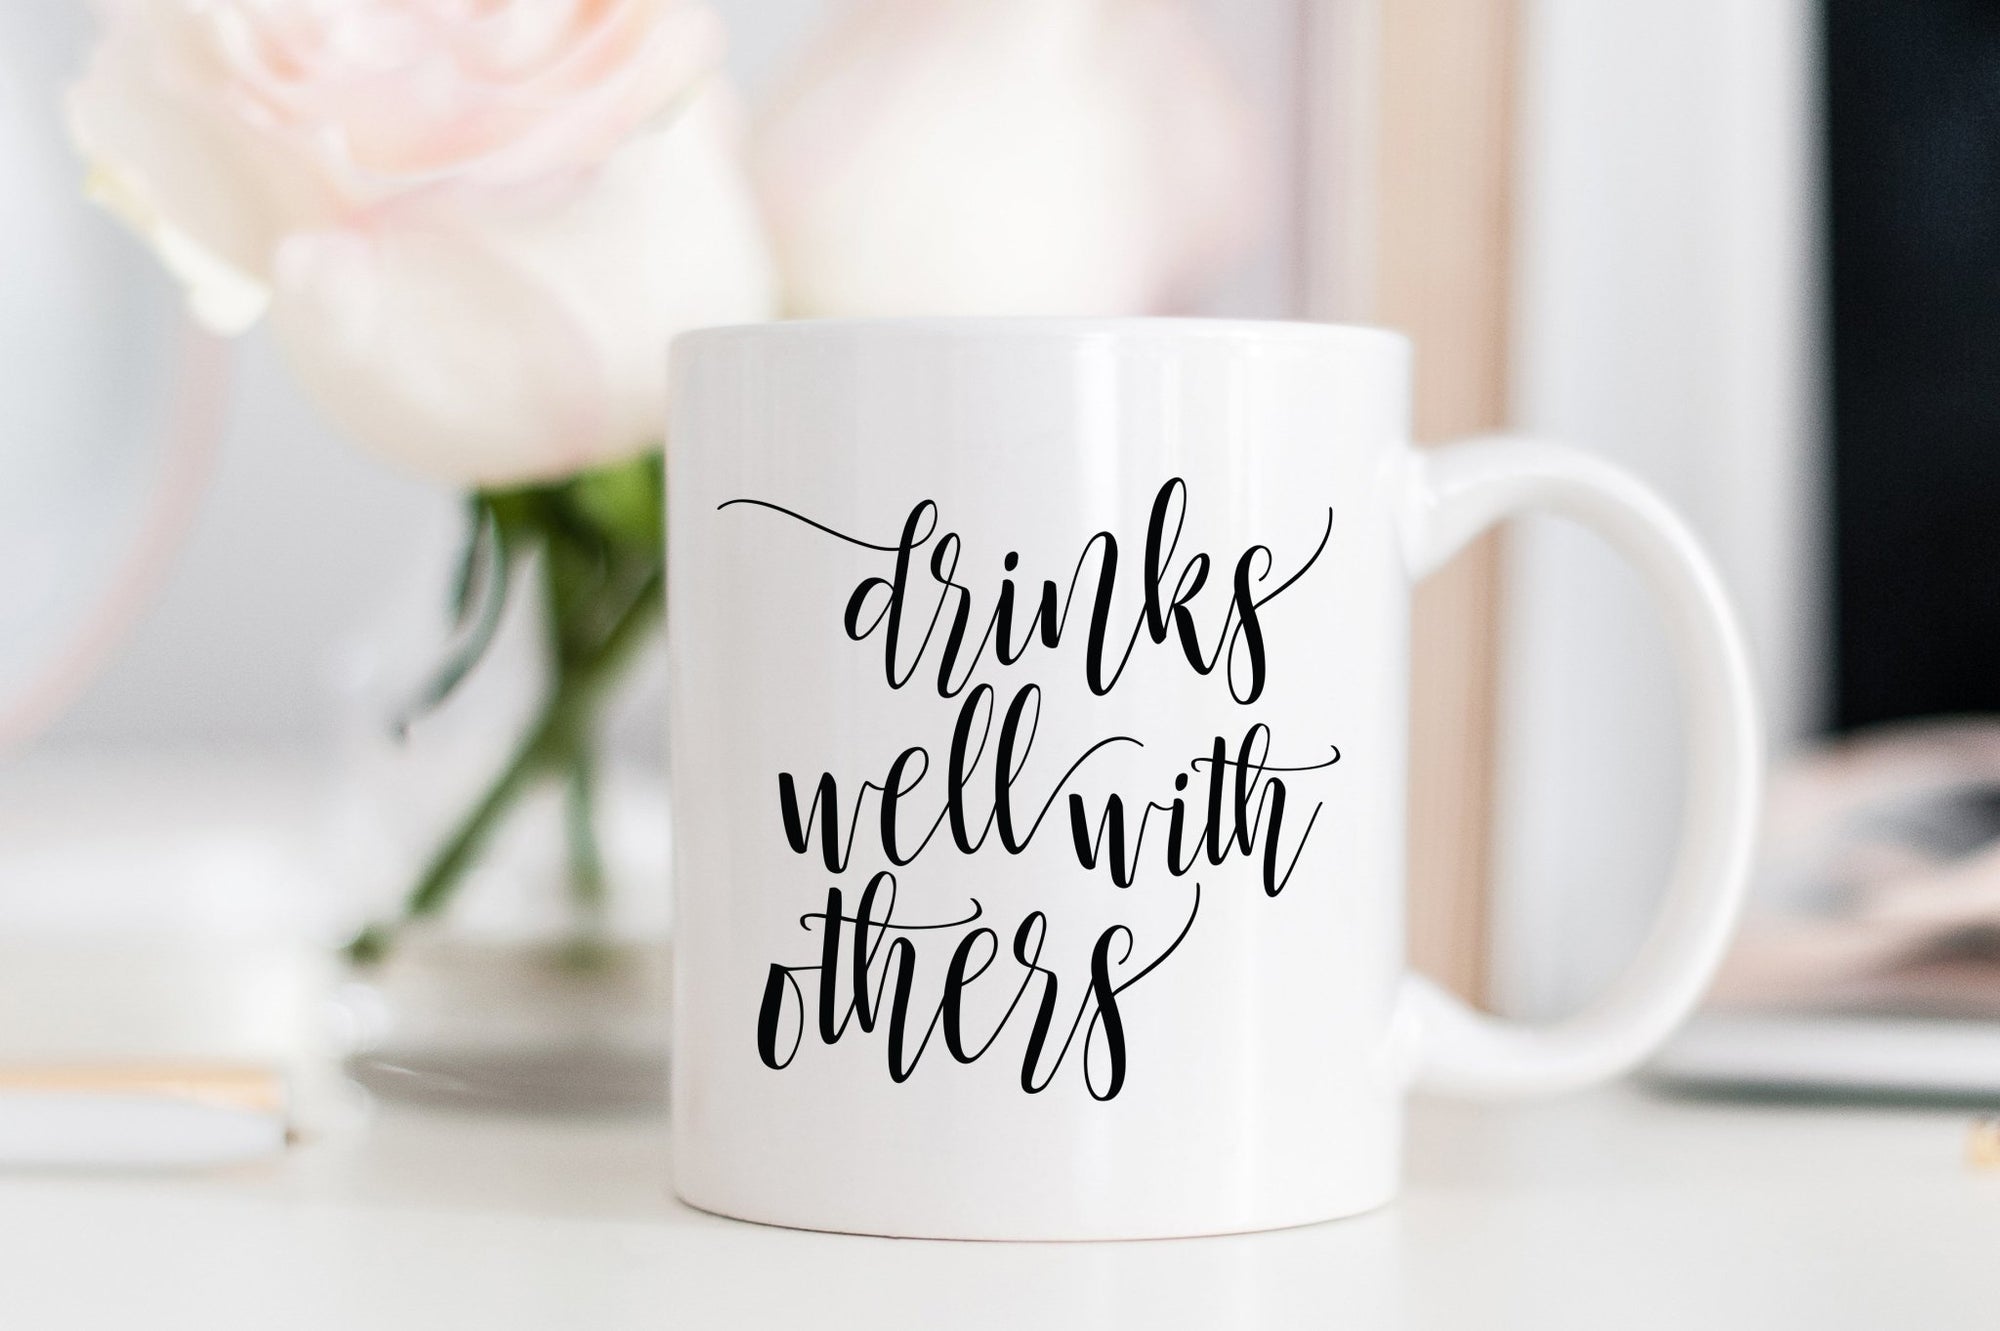 Drinks Well With Others Mug - Pretty Collected